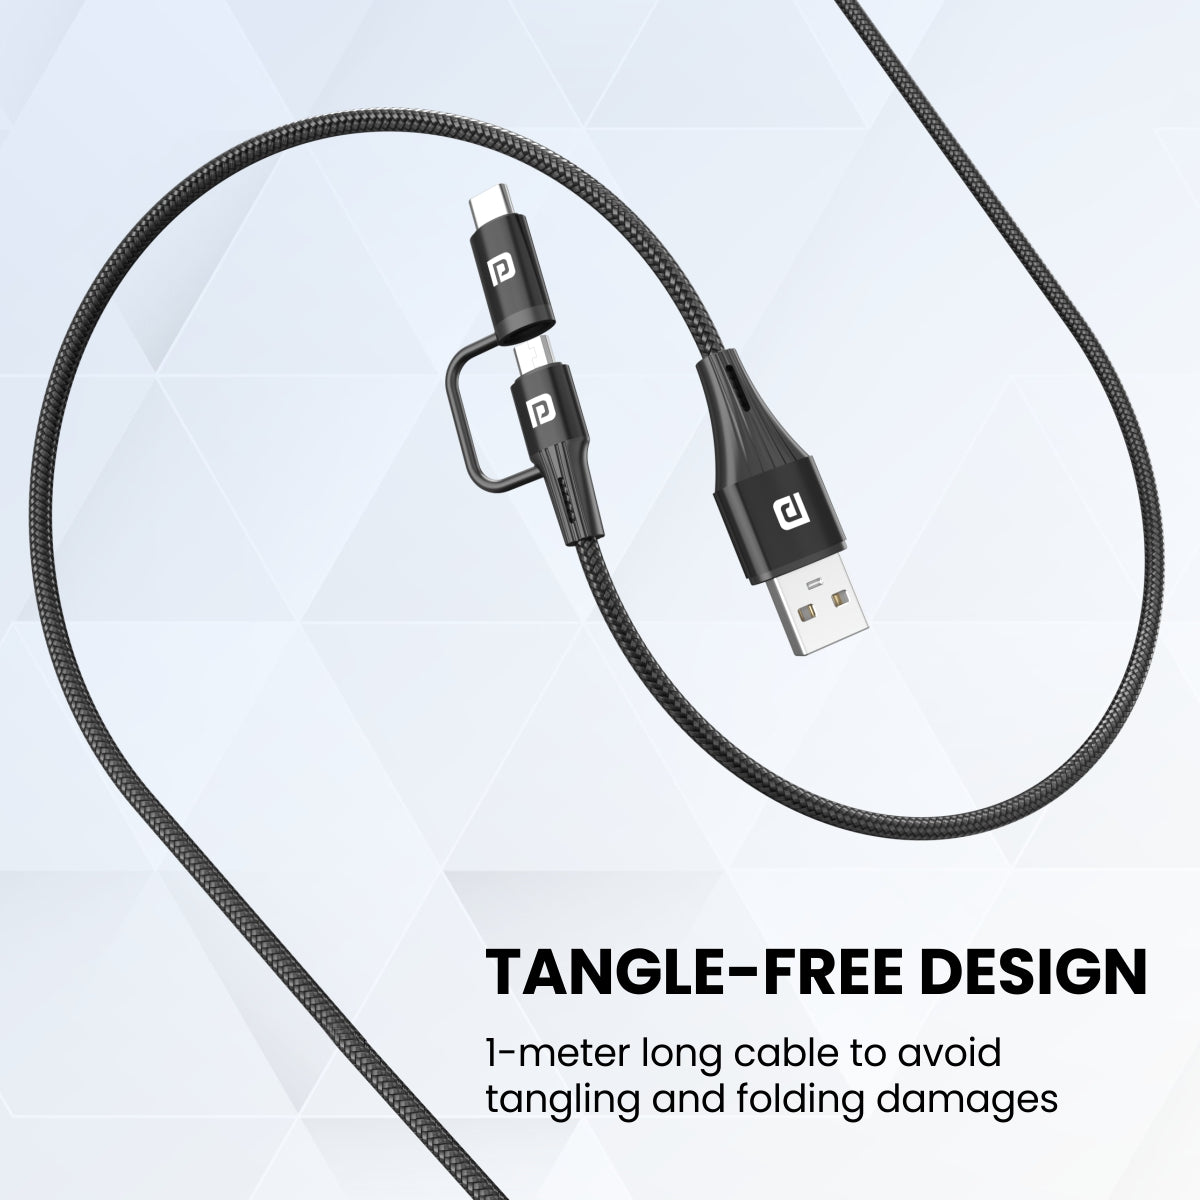 Portronics Konnect J7 Dual headed Cable Micro and Type C Cable tangle free cable. Black 